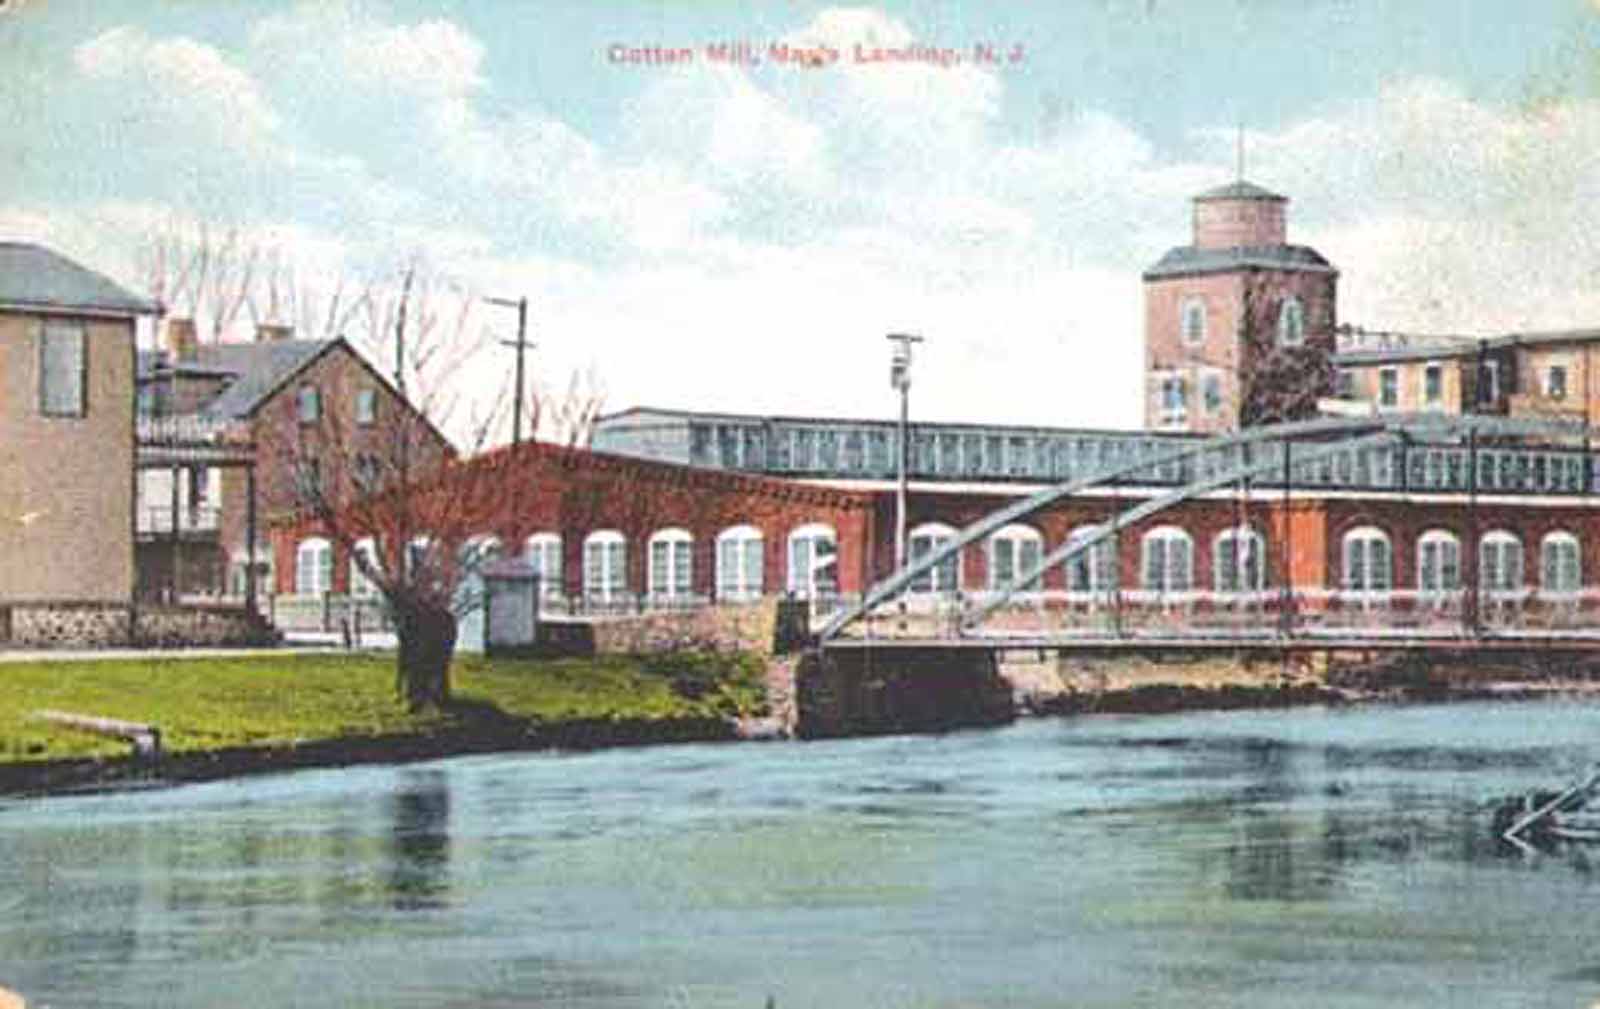 Mays Landing - One story section of Cotton Mill